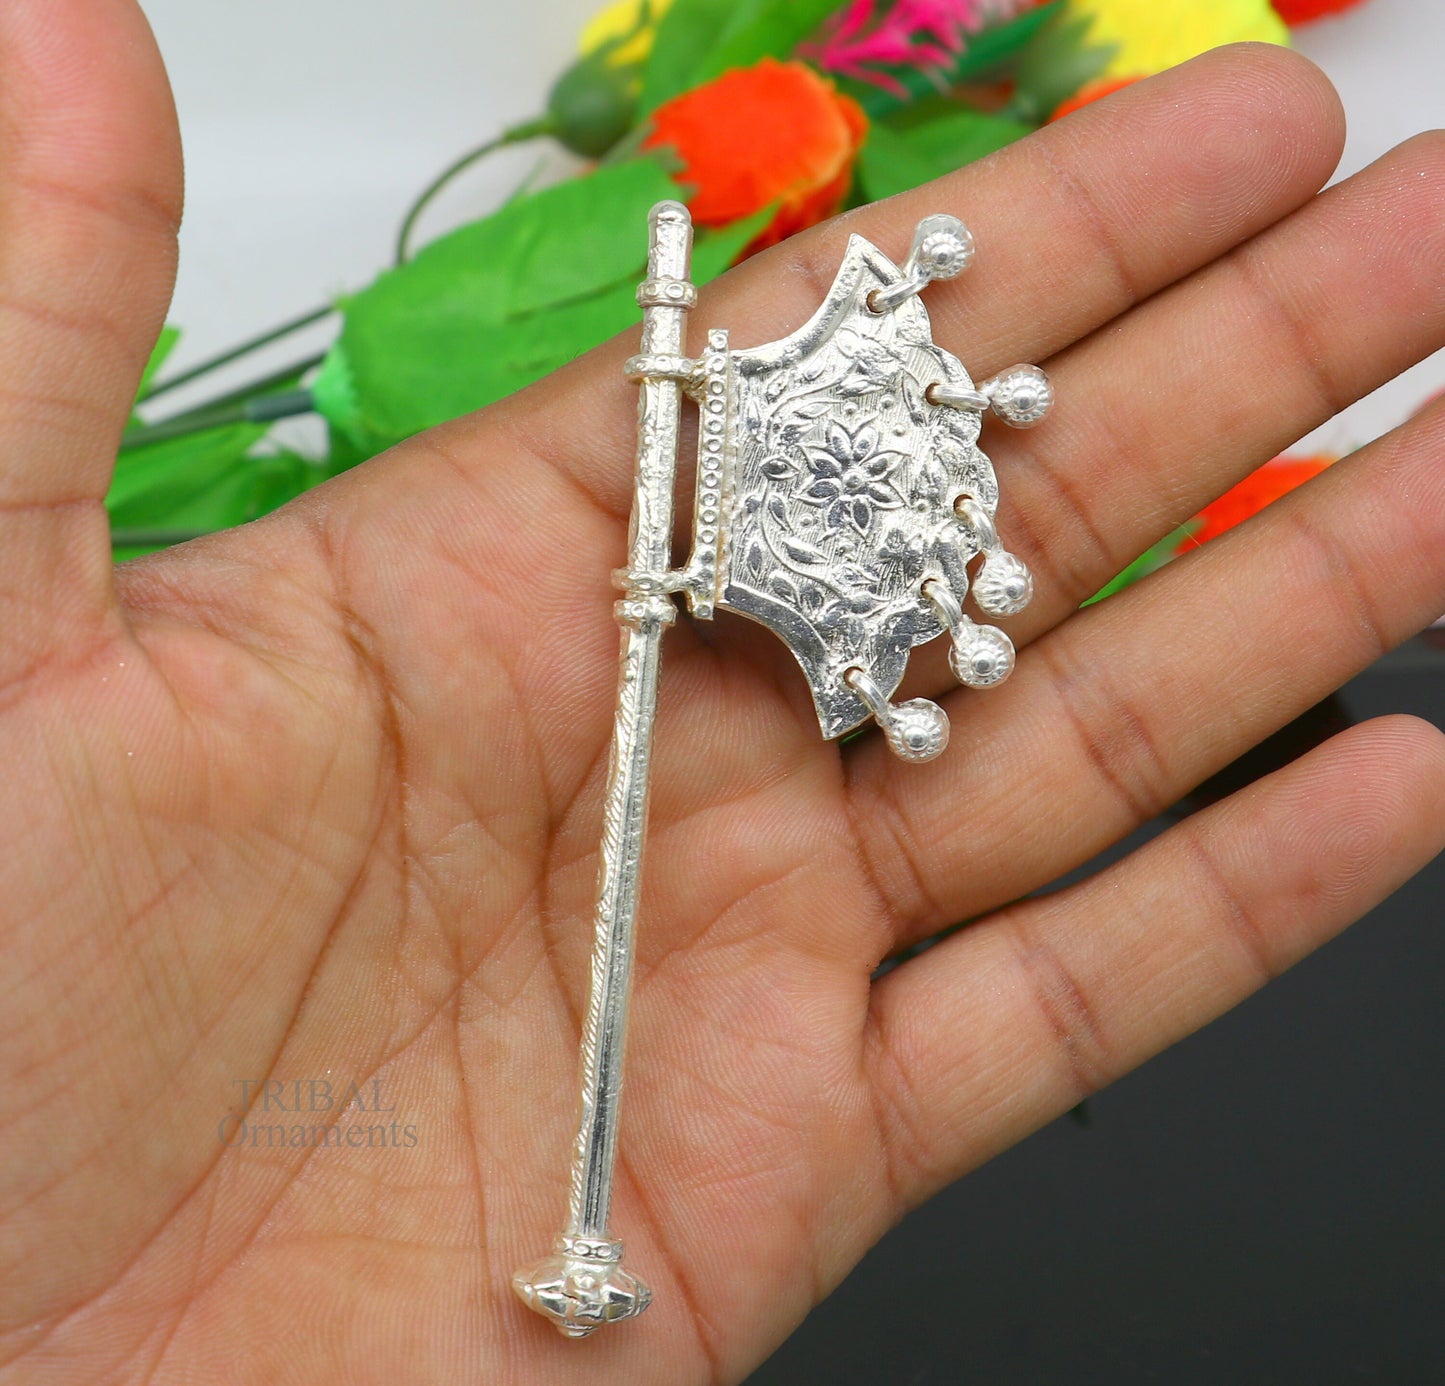 925 sterling silver pankhi, small fan or pankhi for god puja, best gifting to laddu gopala krishna, silver hand fan puja article su688 - TRIBAL ORNAMENTS